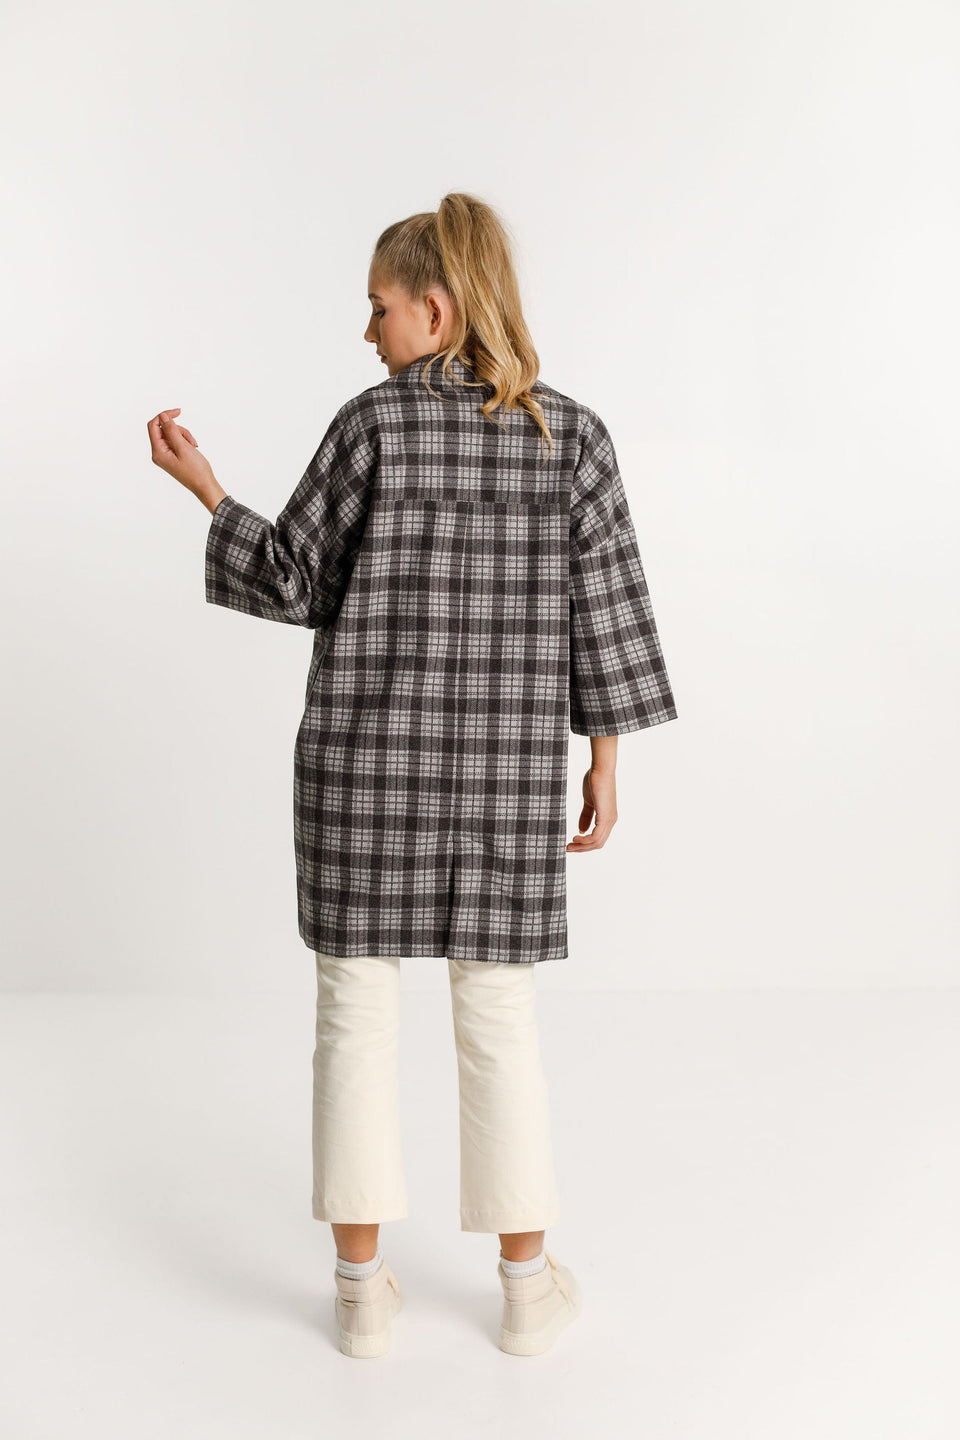 Thing Thing Trixie Coat Charcoal Plaid